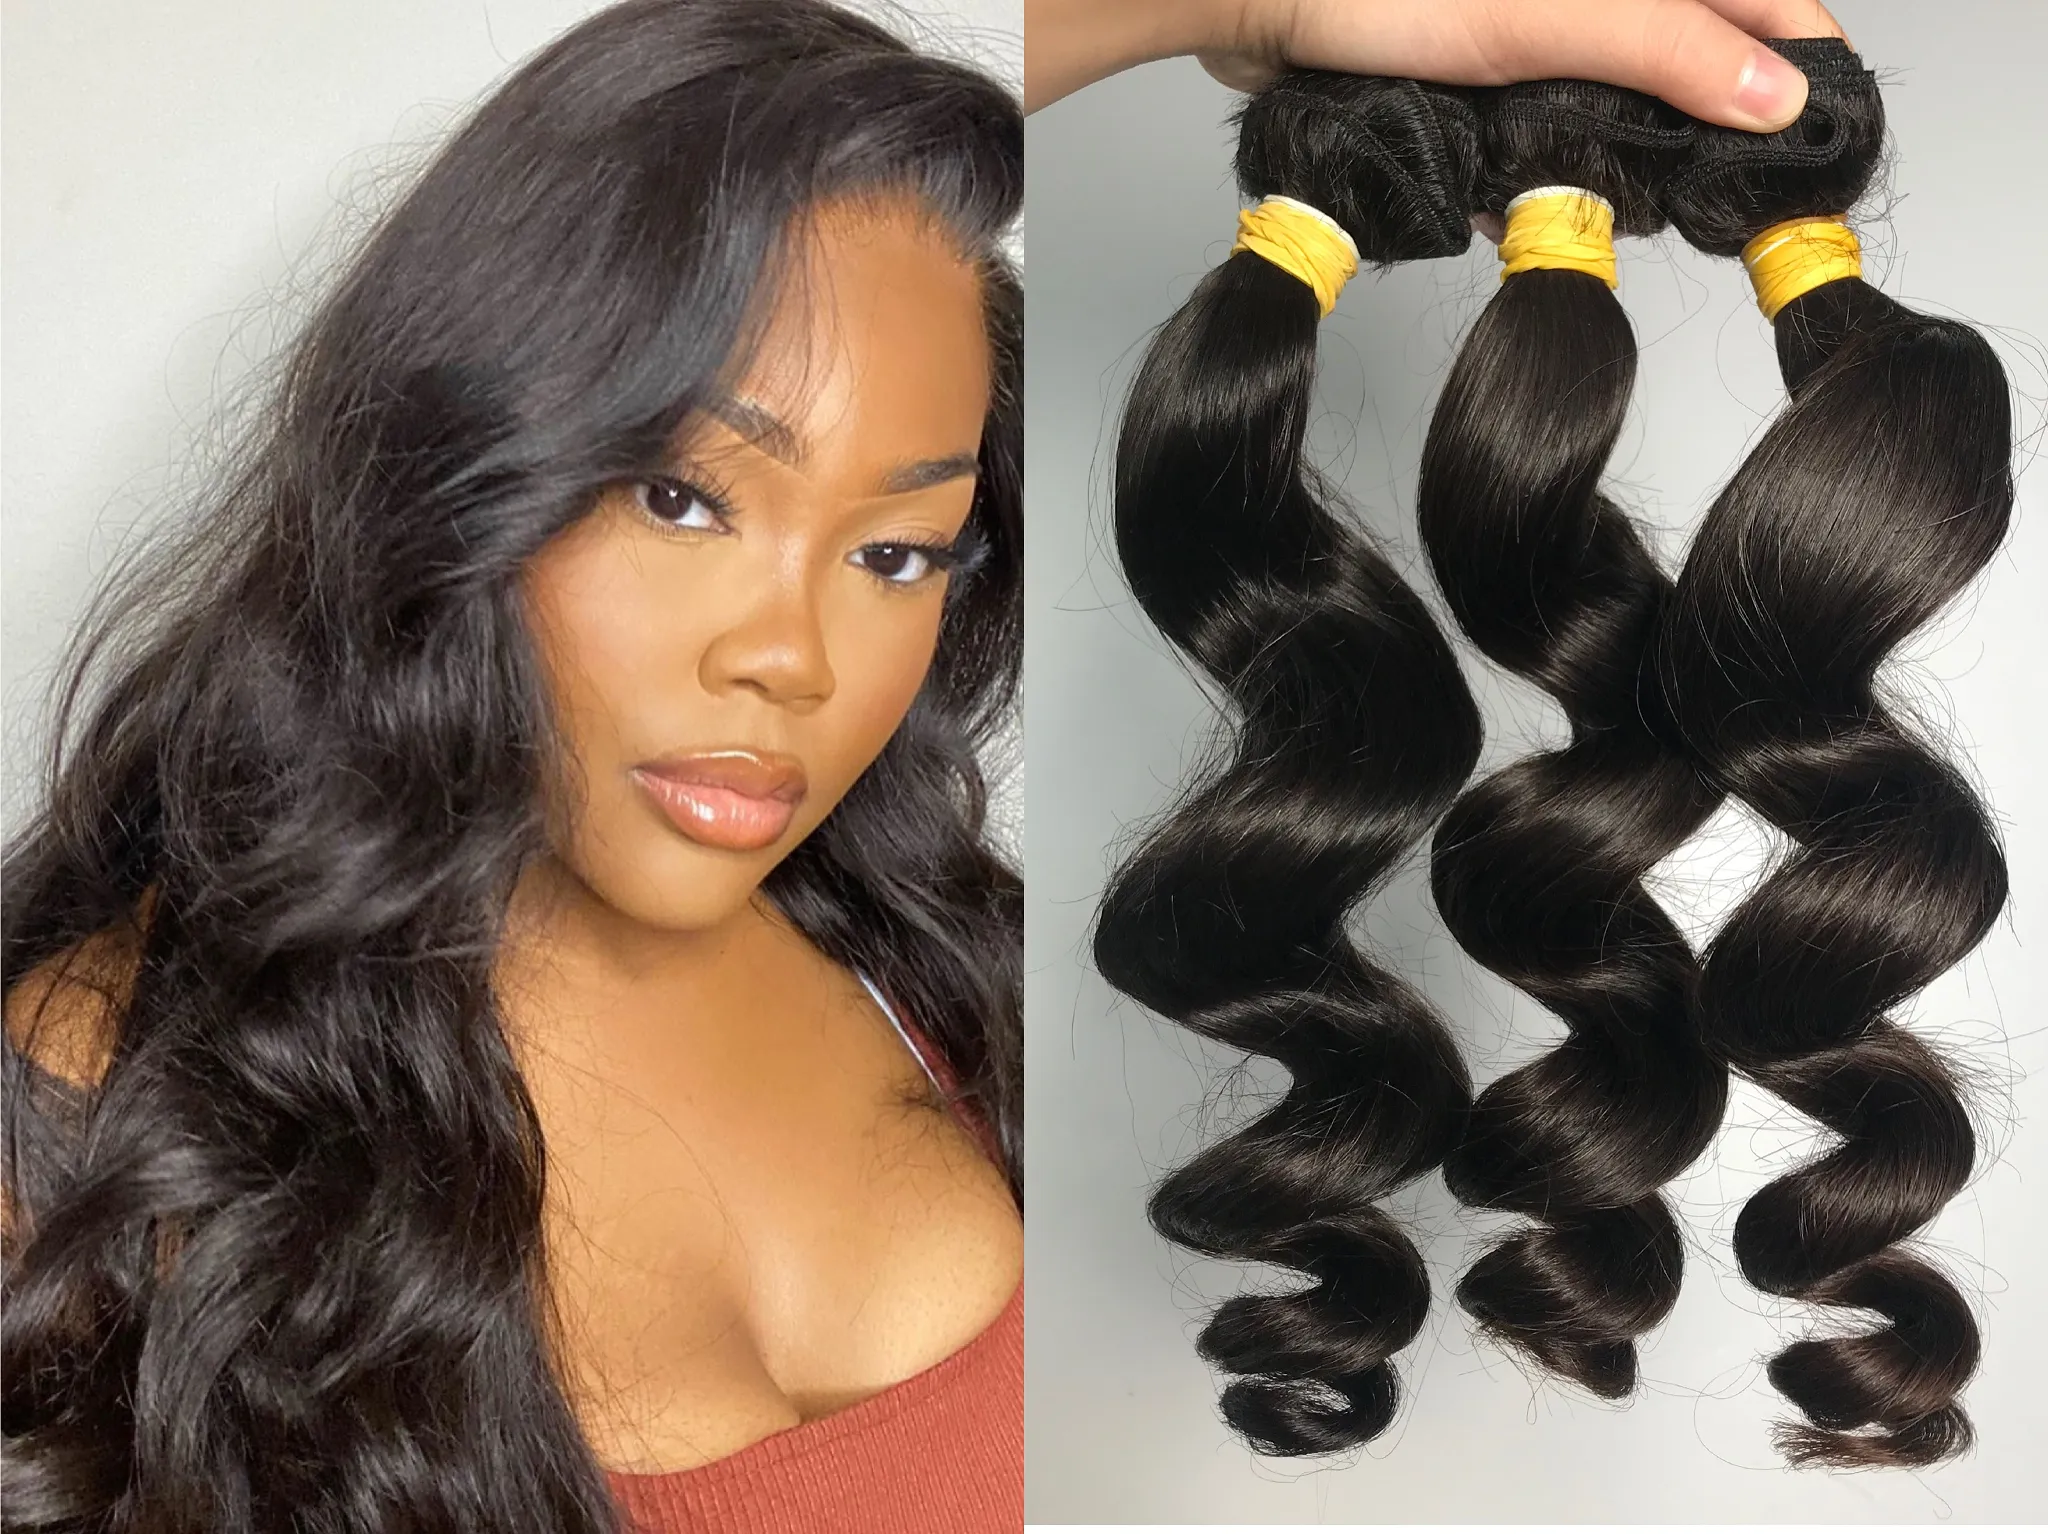 Fashion style loose wave 100% natural Indian virgin human hair bundles 3 piece whosale price best quality